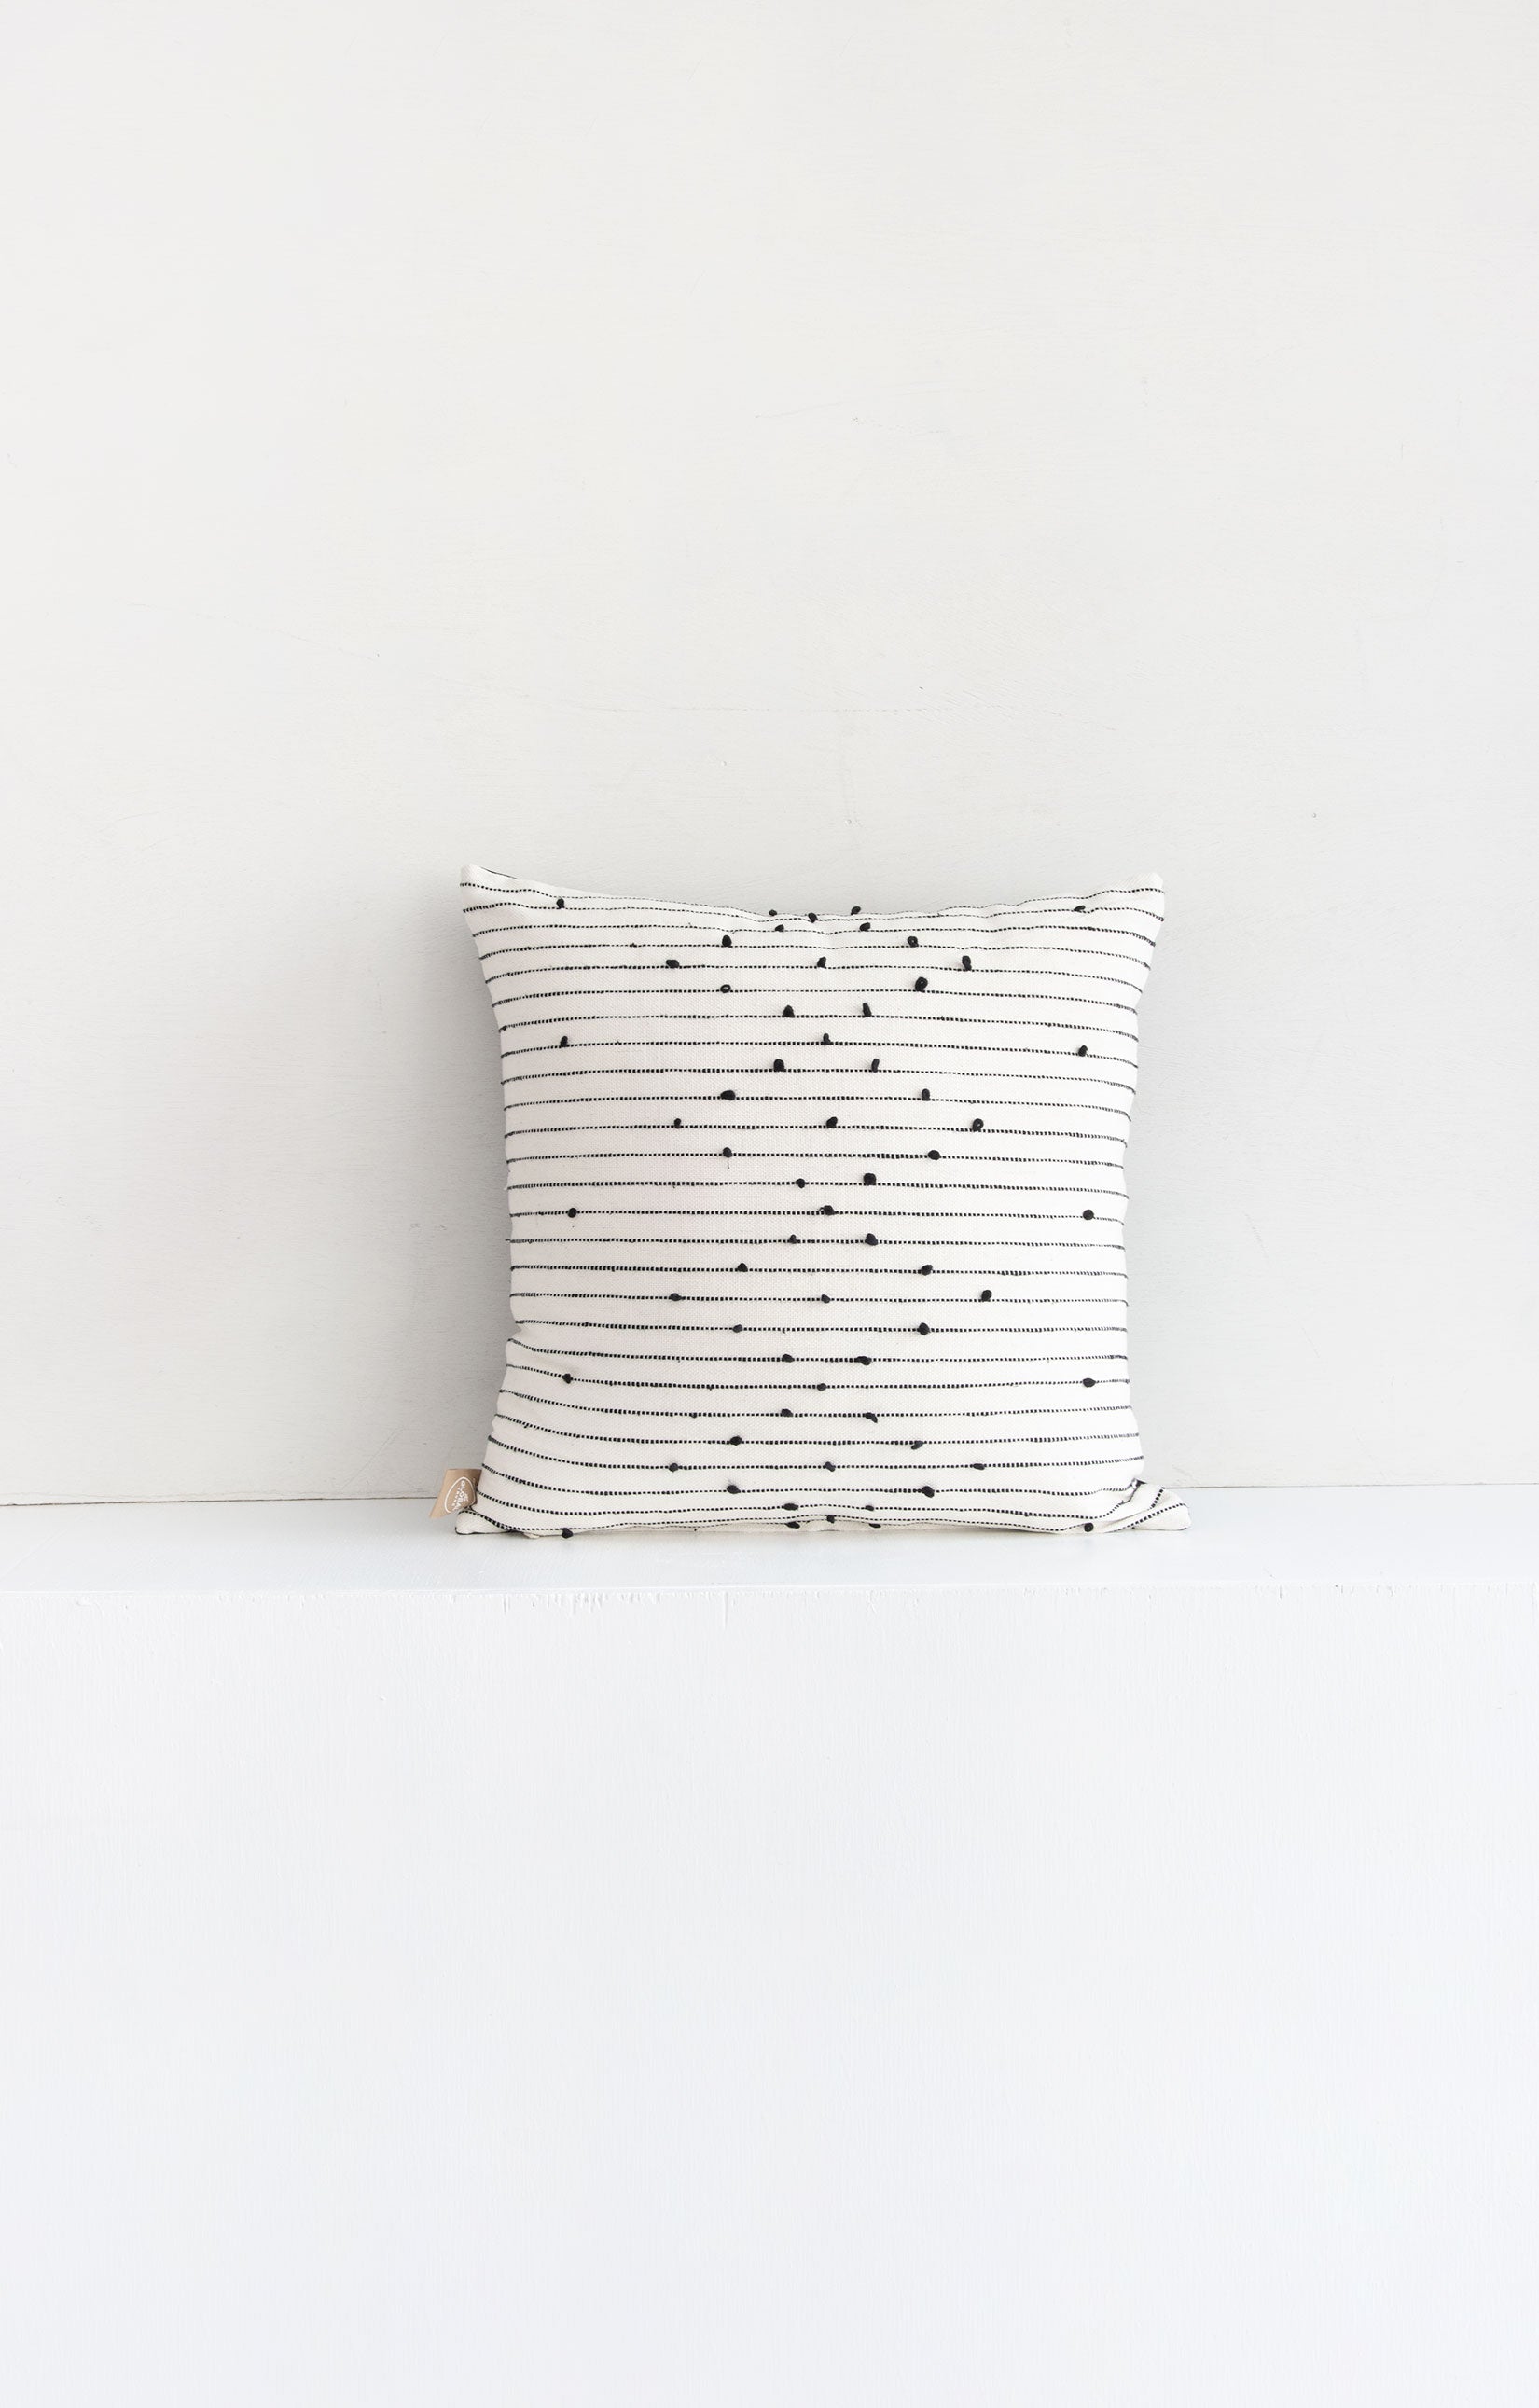 Square white woven throw pillow with small black pom pom accents arranged in a repeating diamond pattern arranged along black lines stretching across the pillow.